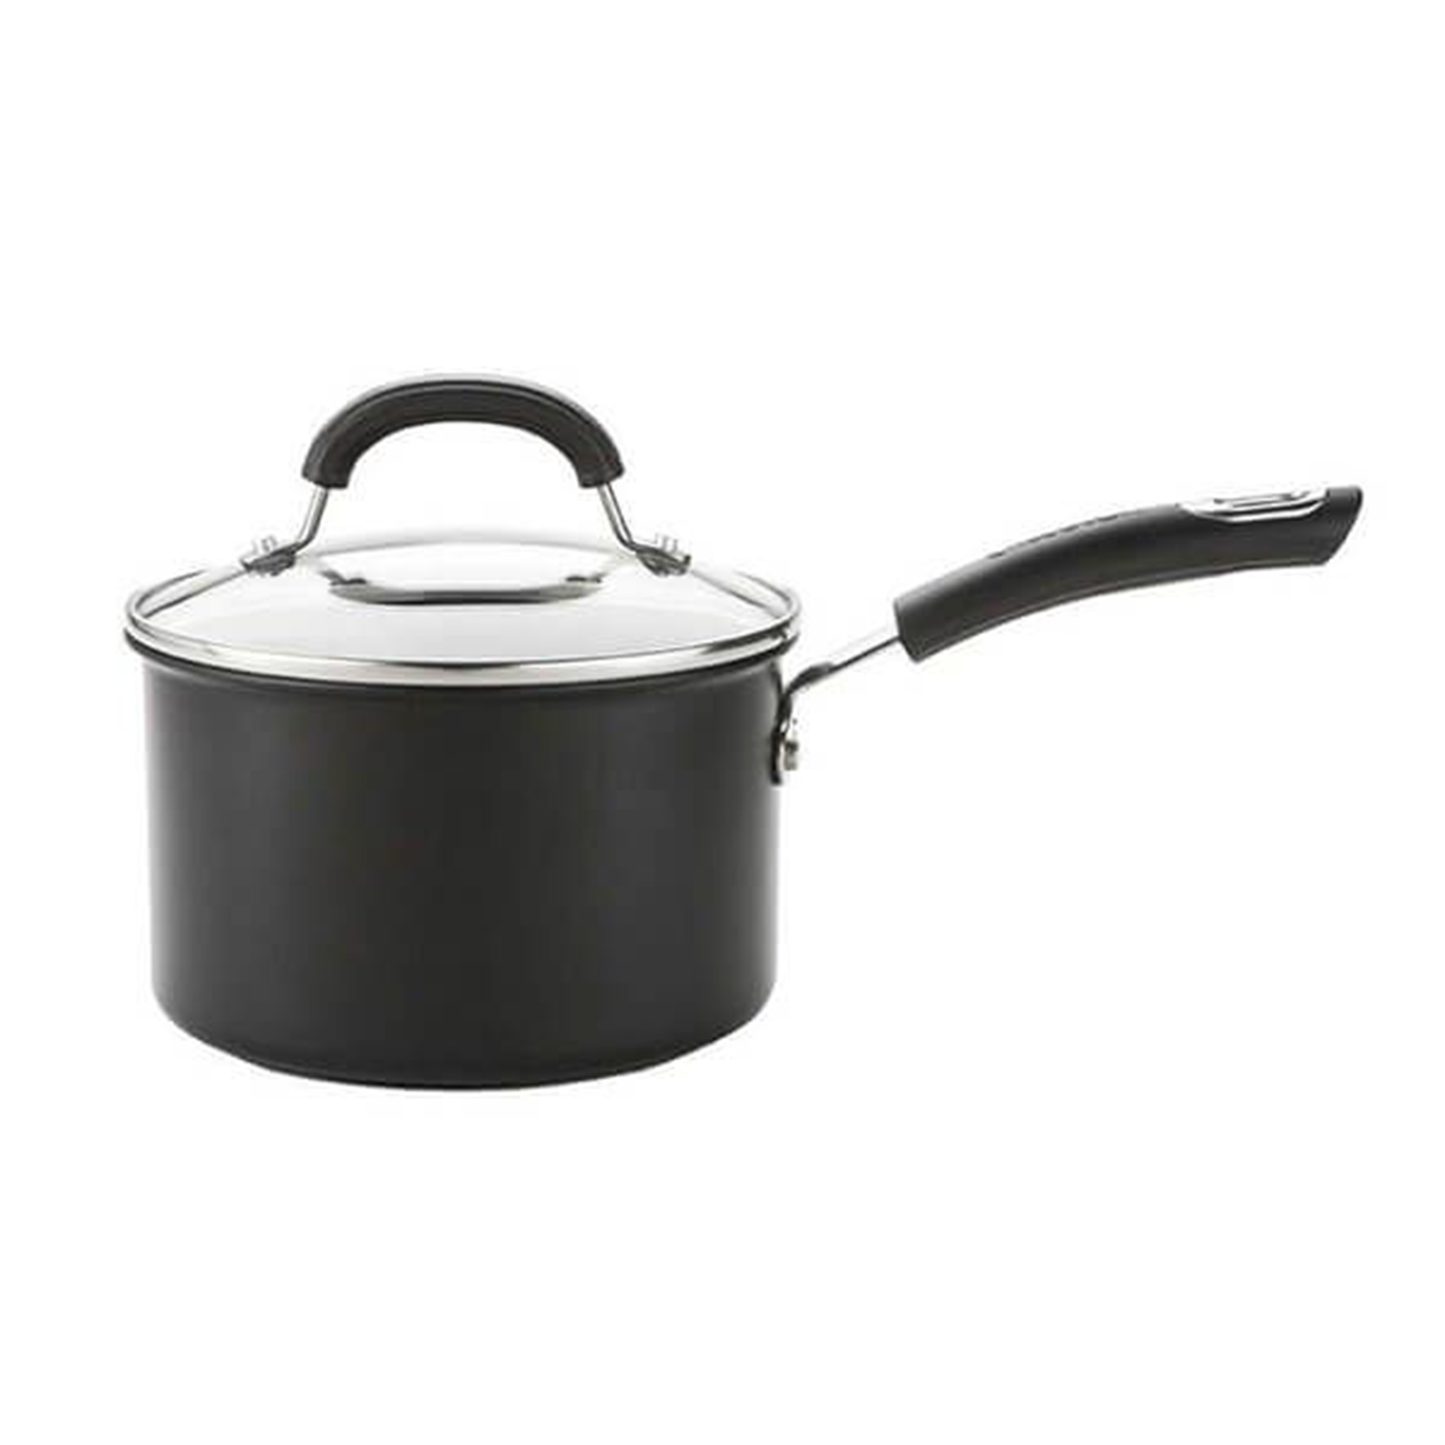 a black saucepan with a glass lid